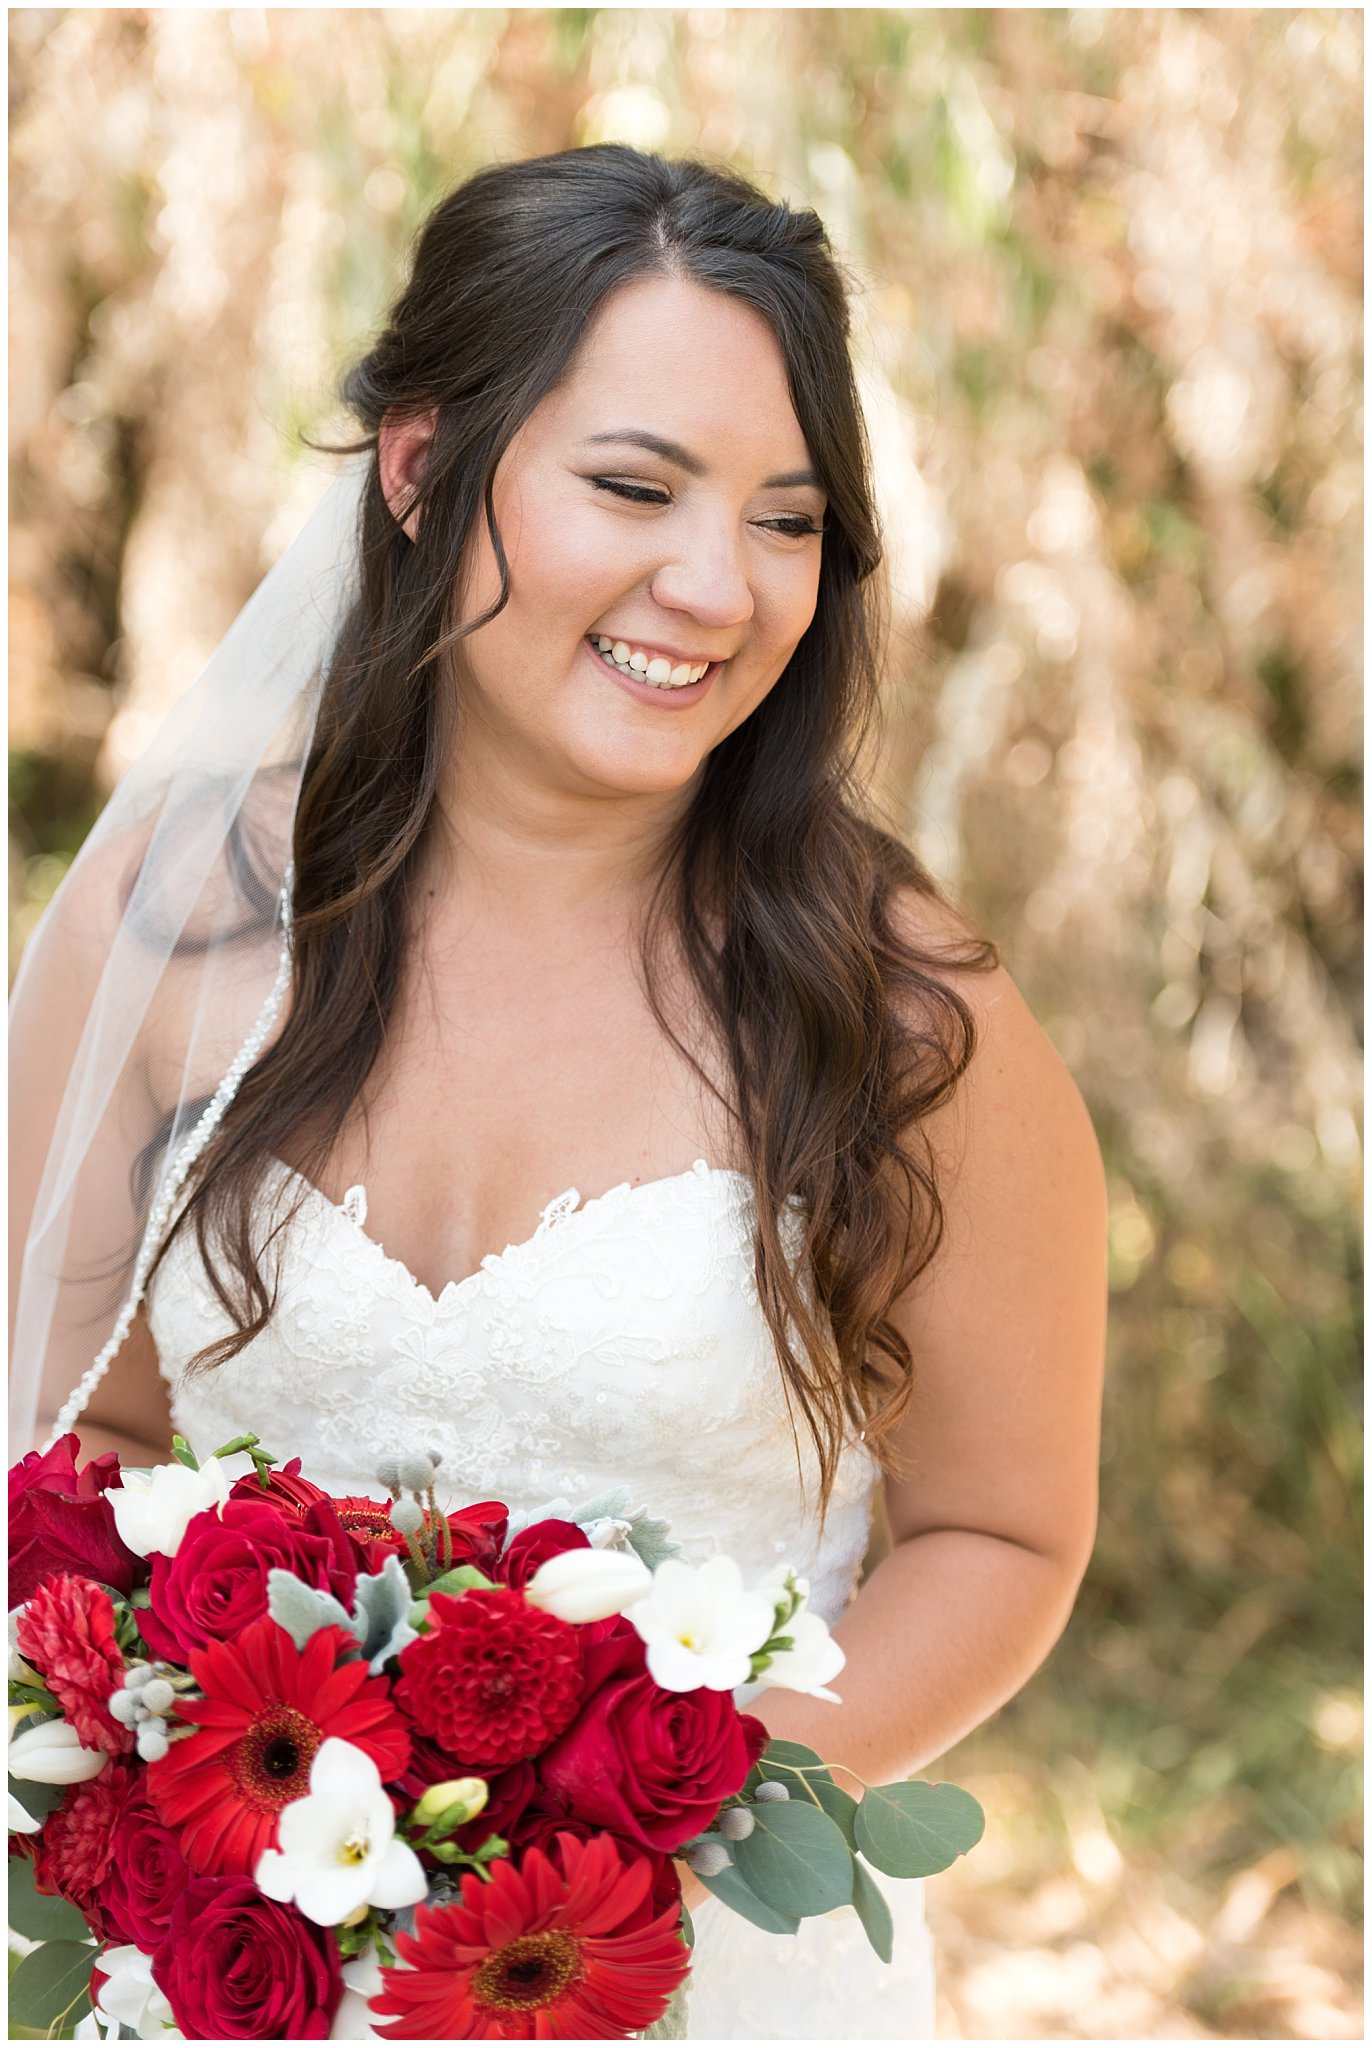 Candid, elegant bridal portrait of laughing bride and red and white bouquet | Davis County Outdoor Wedding | Jessie and Dallin Photography